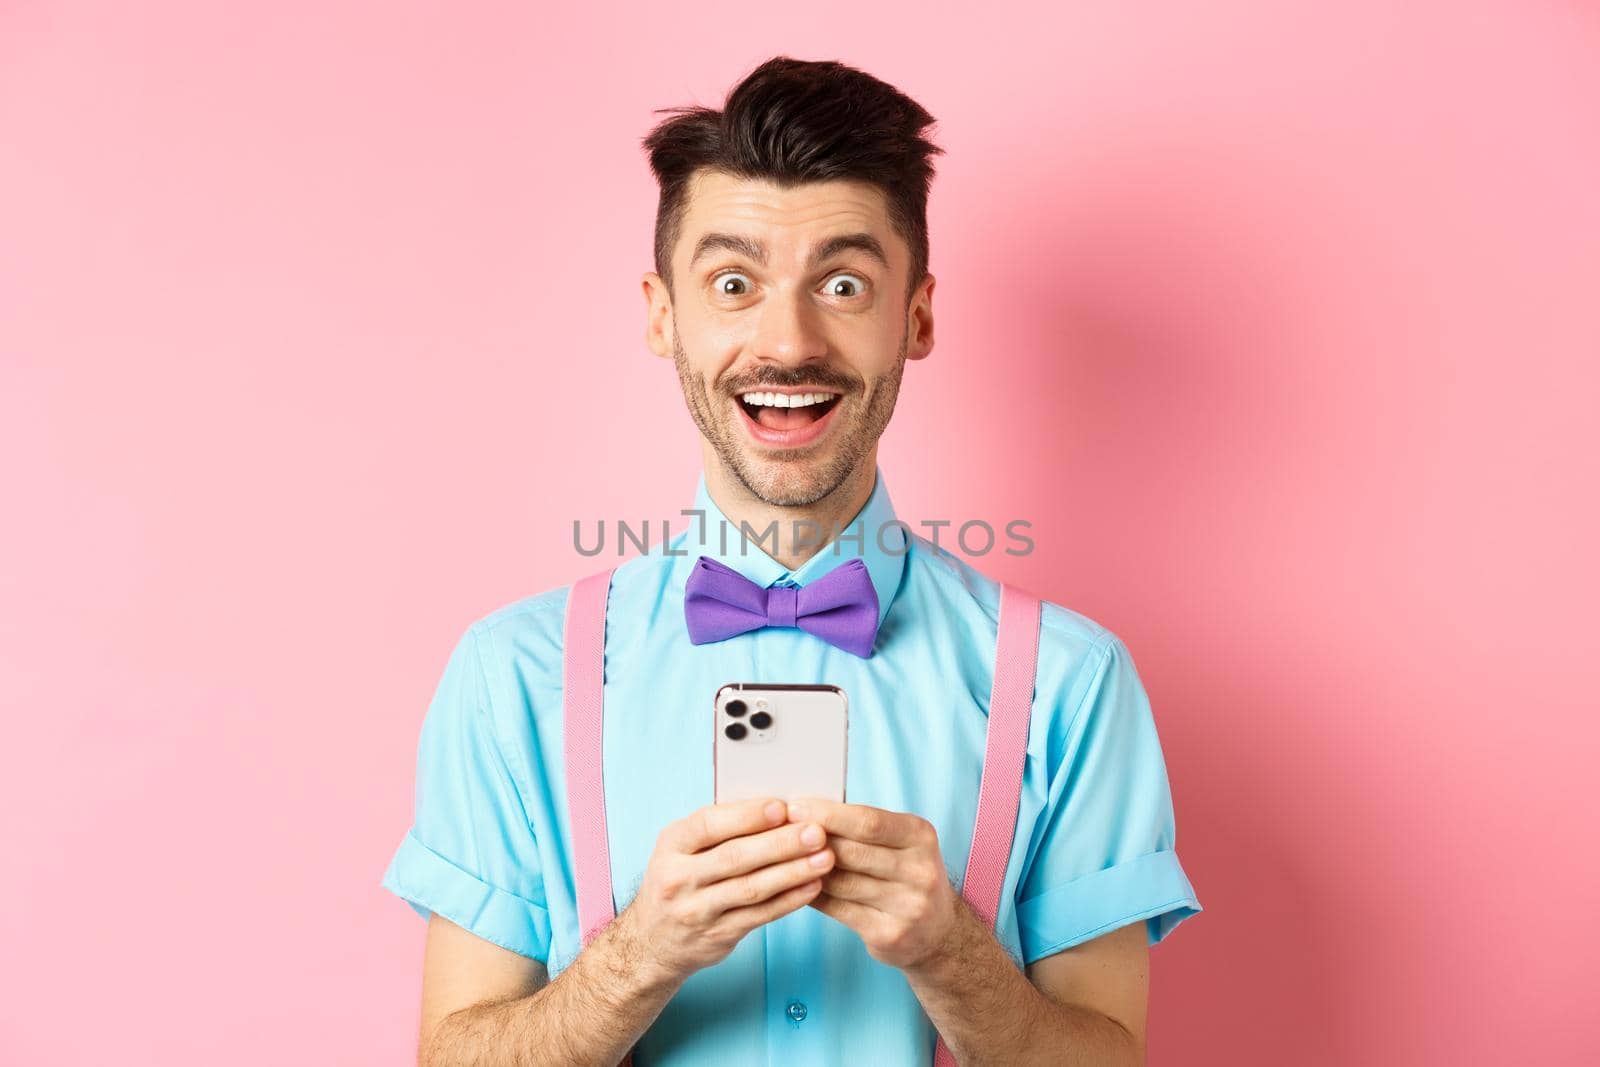 Online shopping. Happy man looking amazed after reading smartphone screen, smiling excited at camera, standing over pink background.